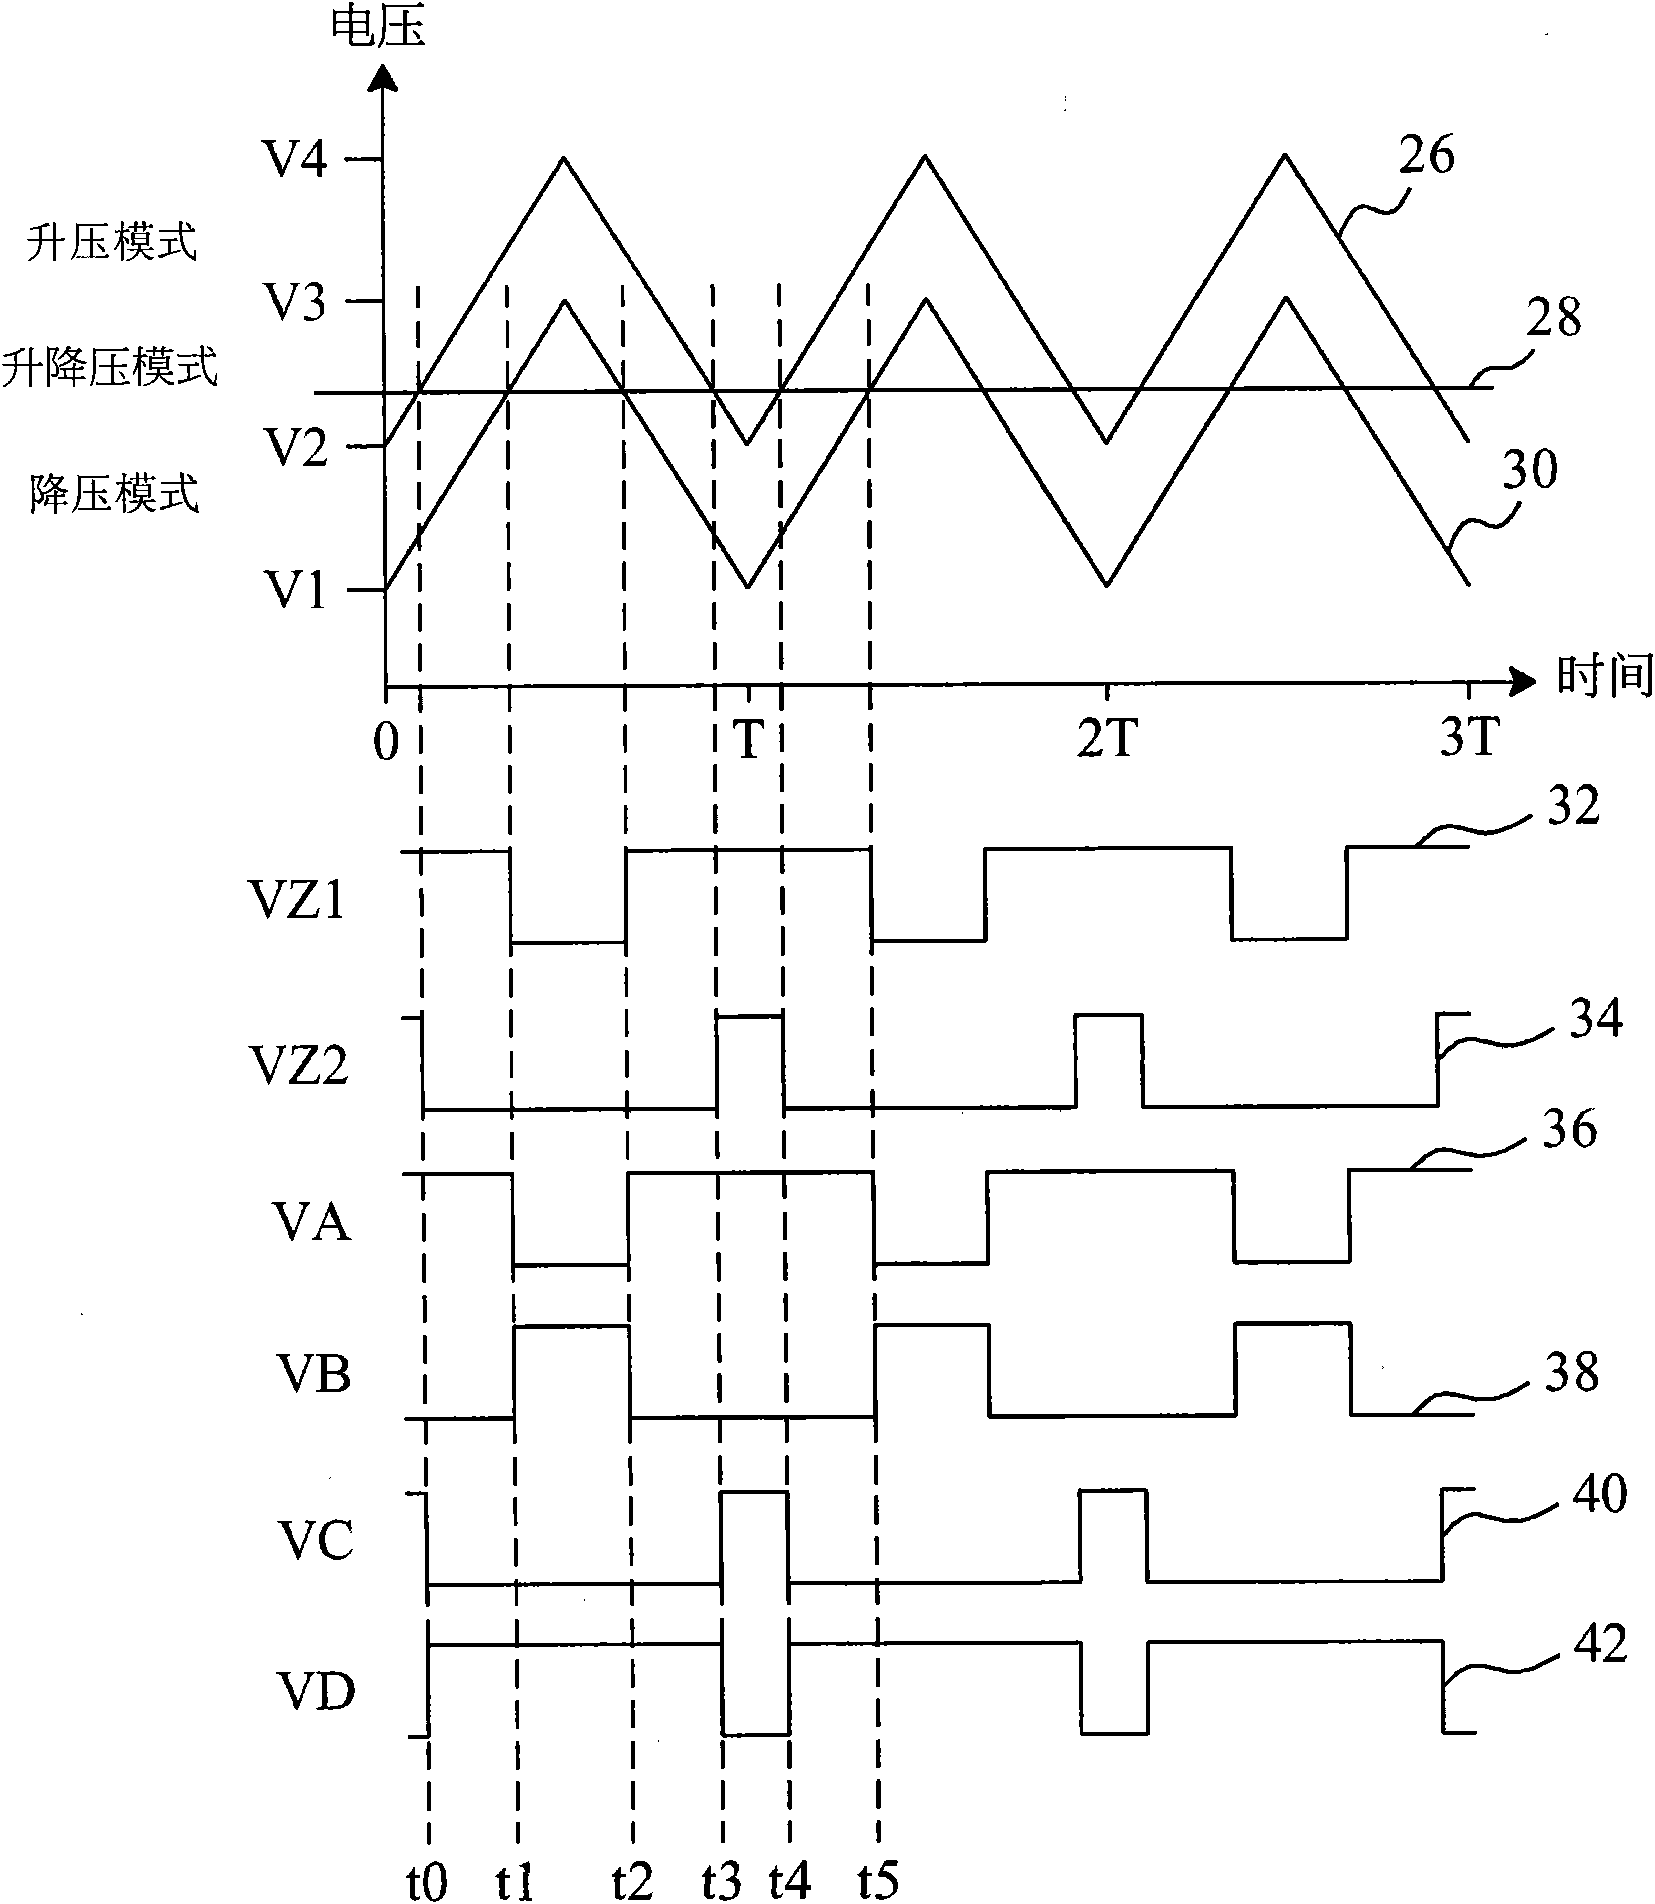 Control circuit and method for buck-boost power supply converter